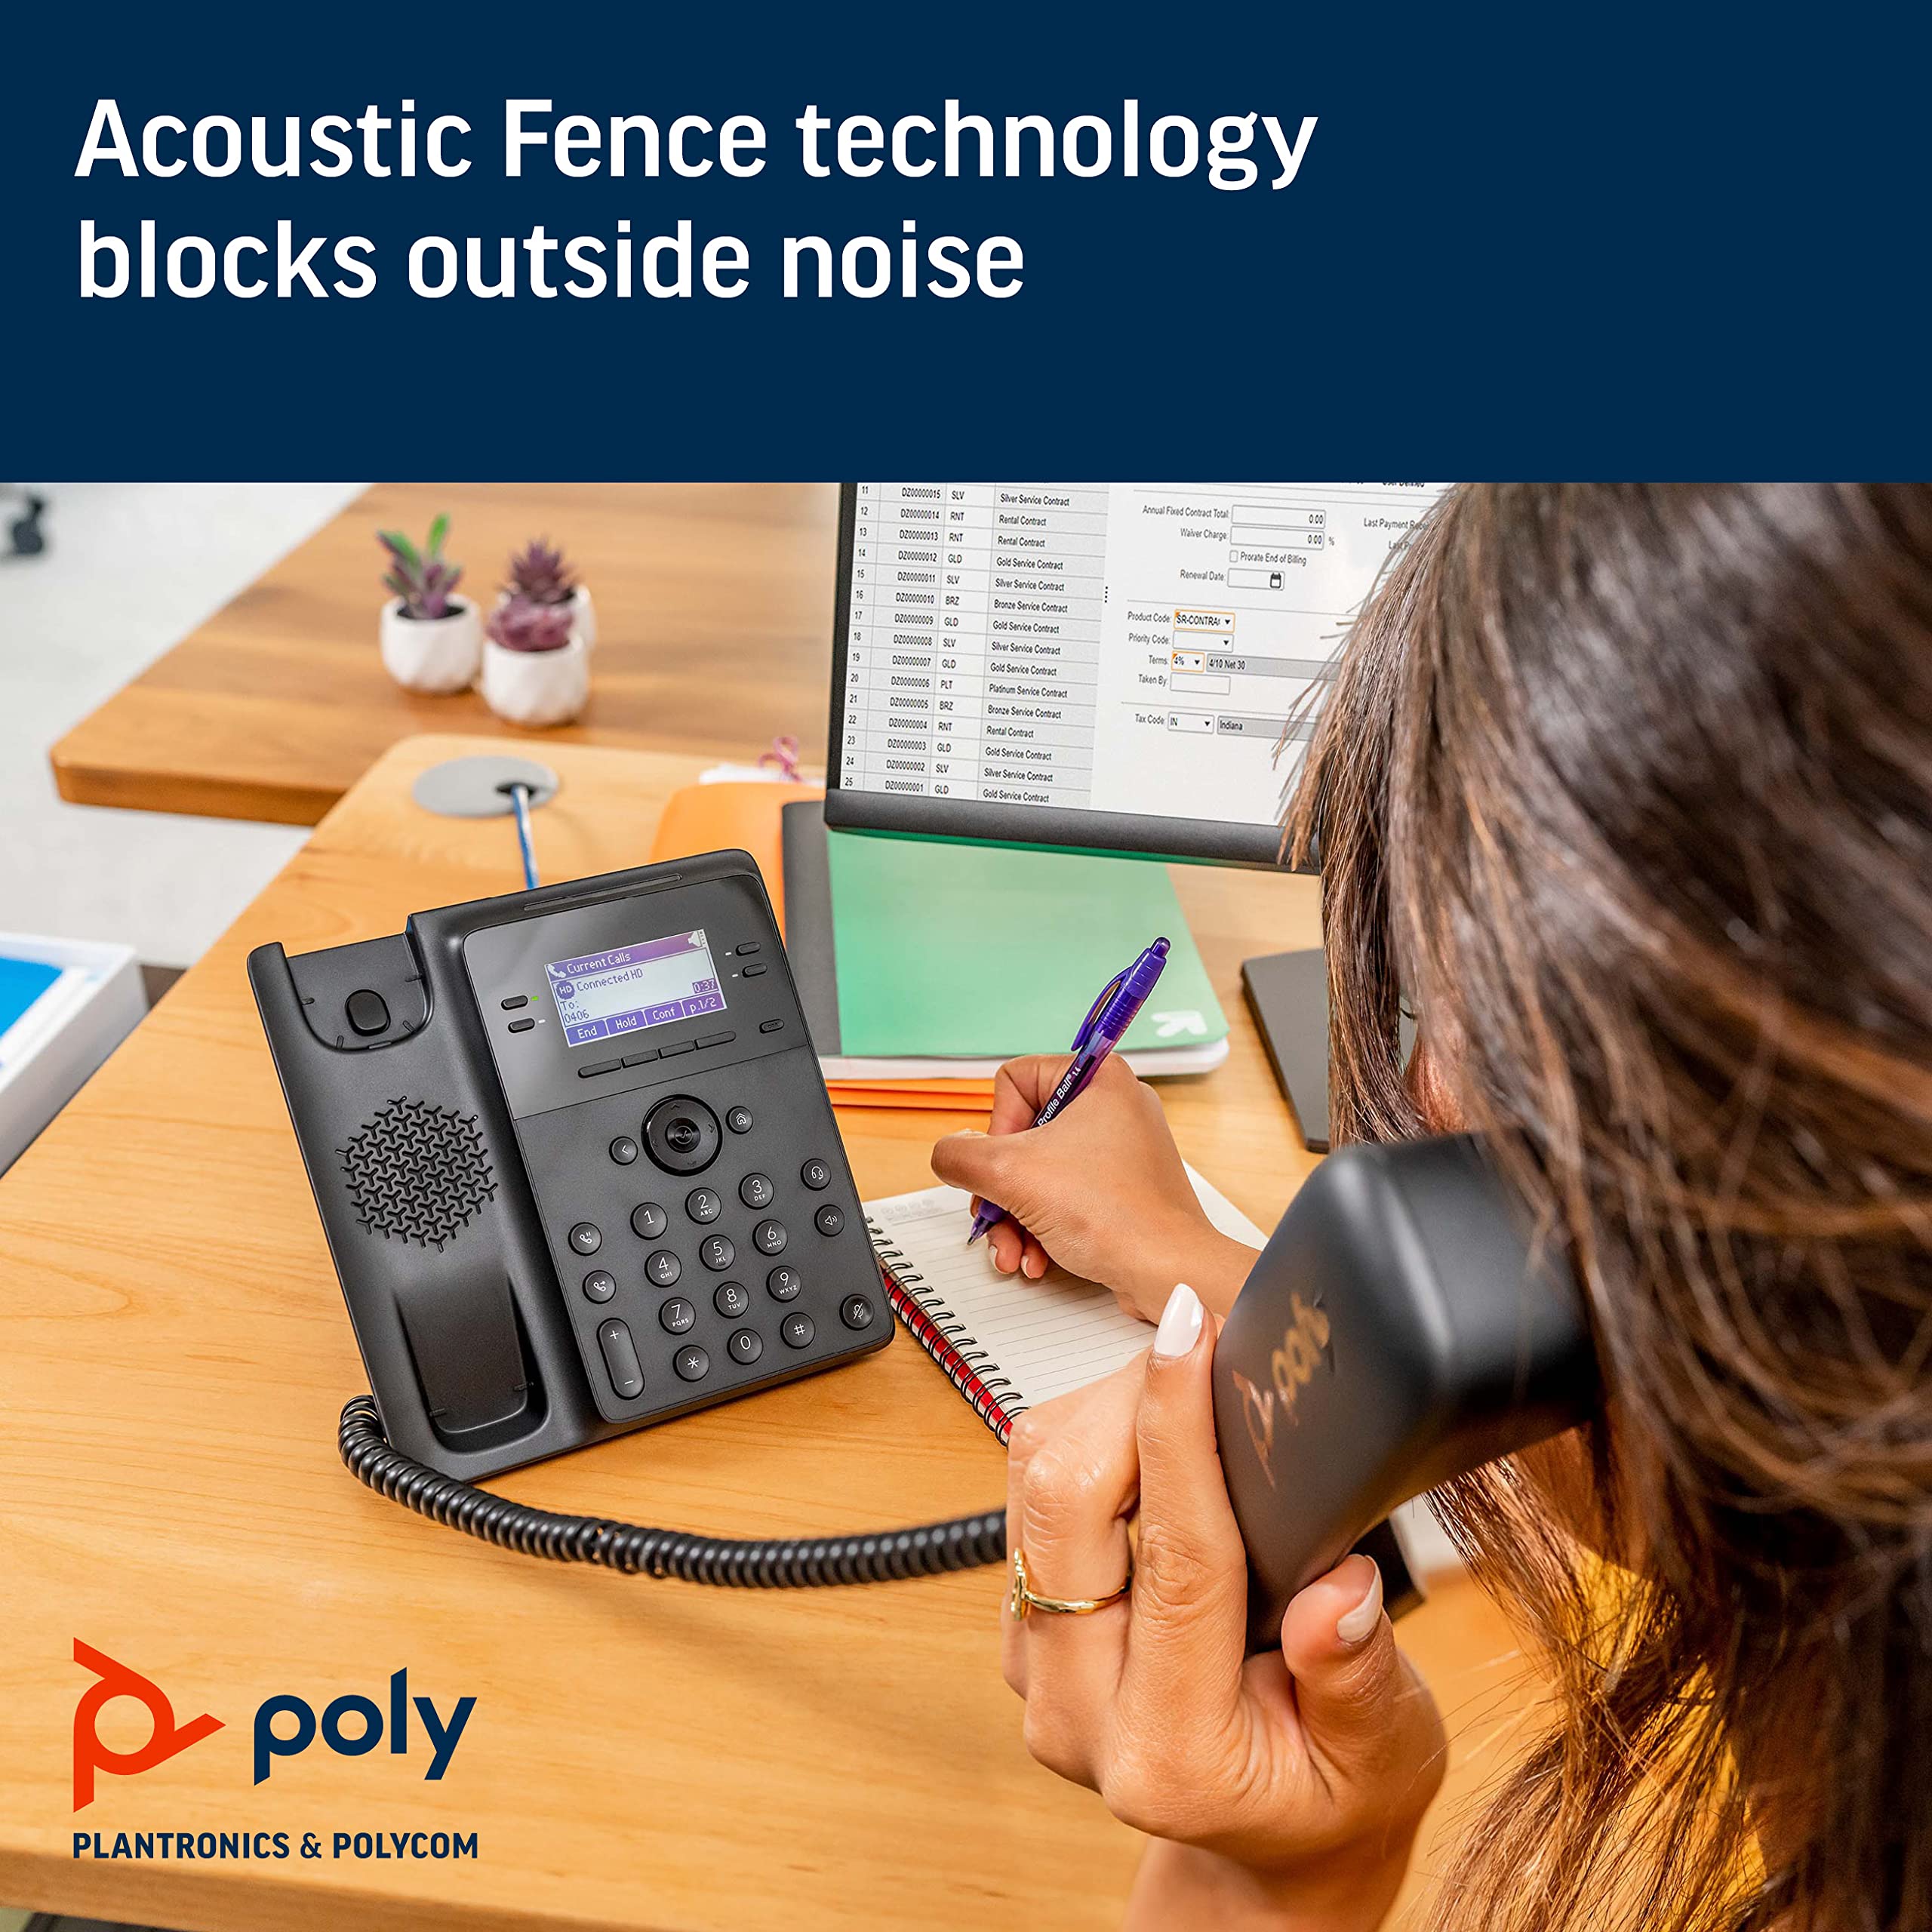 Poly Edge B30 IP Desk Phone, PoE (Polycom) - Open SIP - Connect to 16 Lines - Power Over Ethernet - Acoustic Fence Technology - RJ9 and 3.5mm Headset Ports - Illuminated Keys Where You Need Them